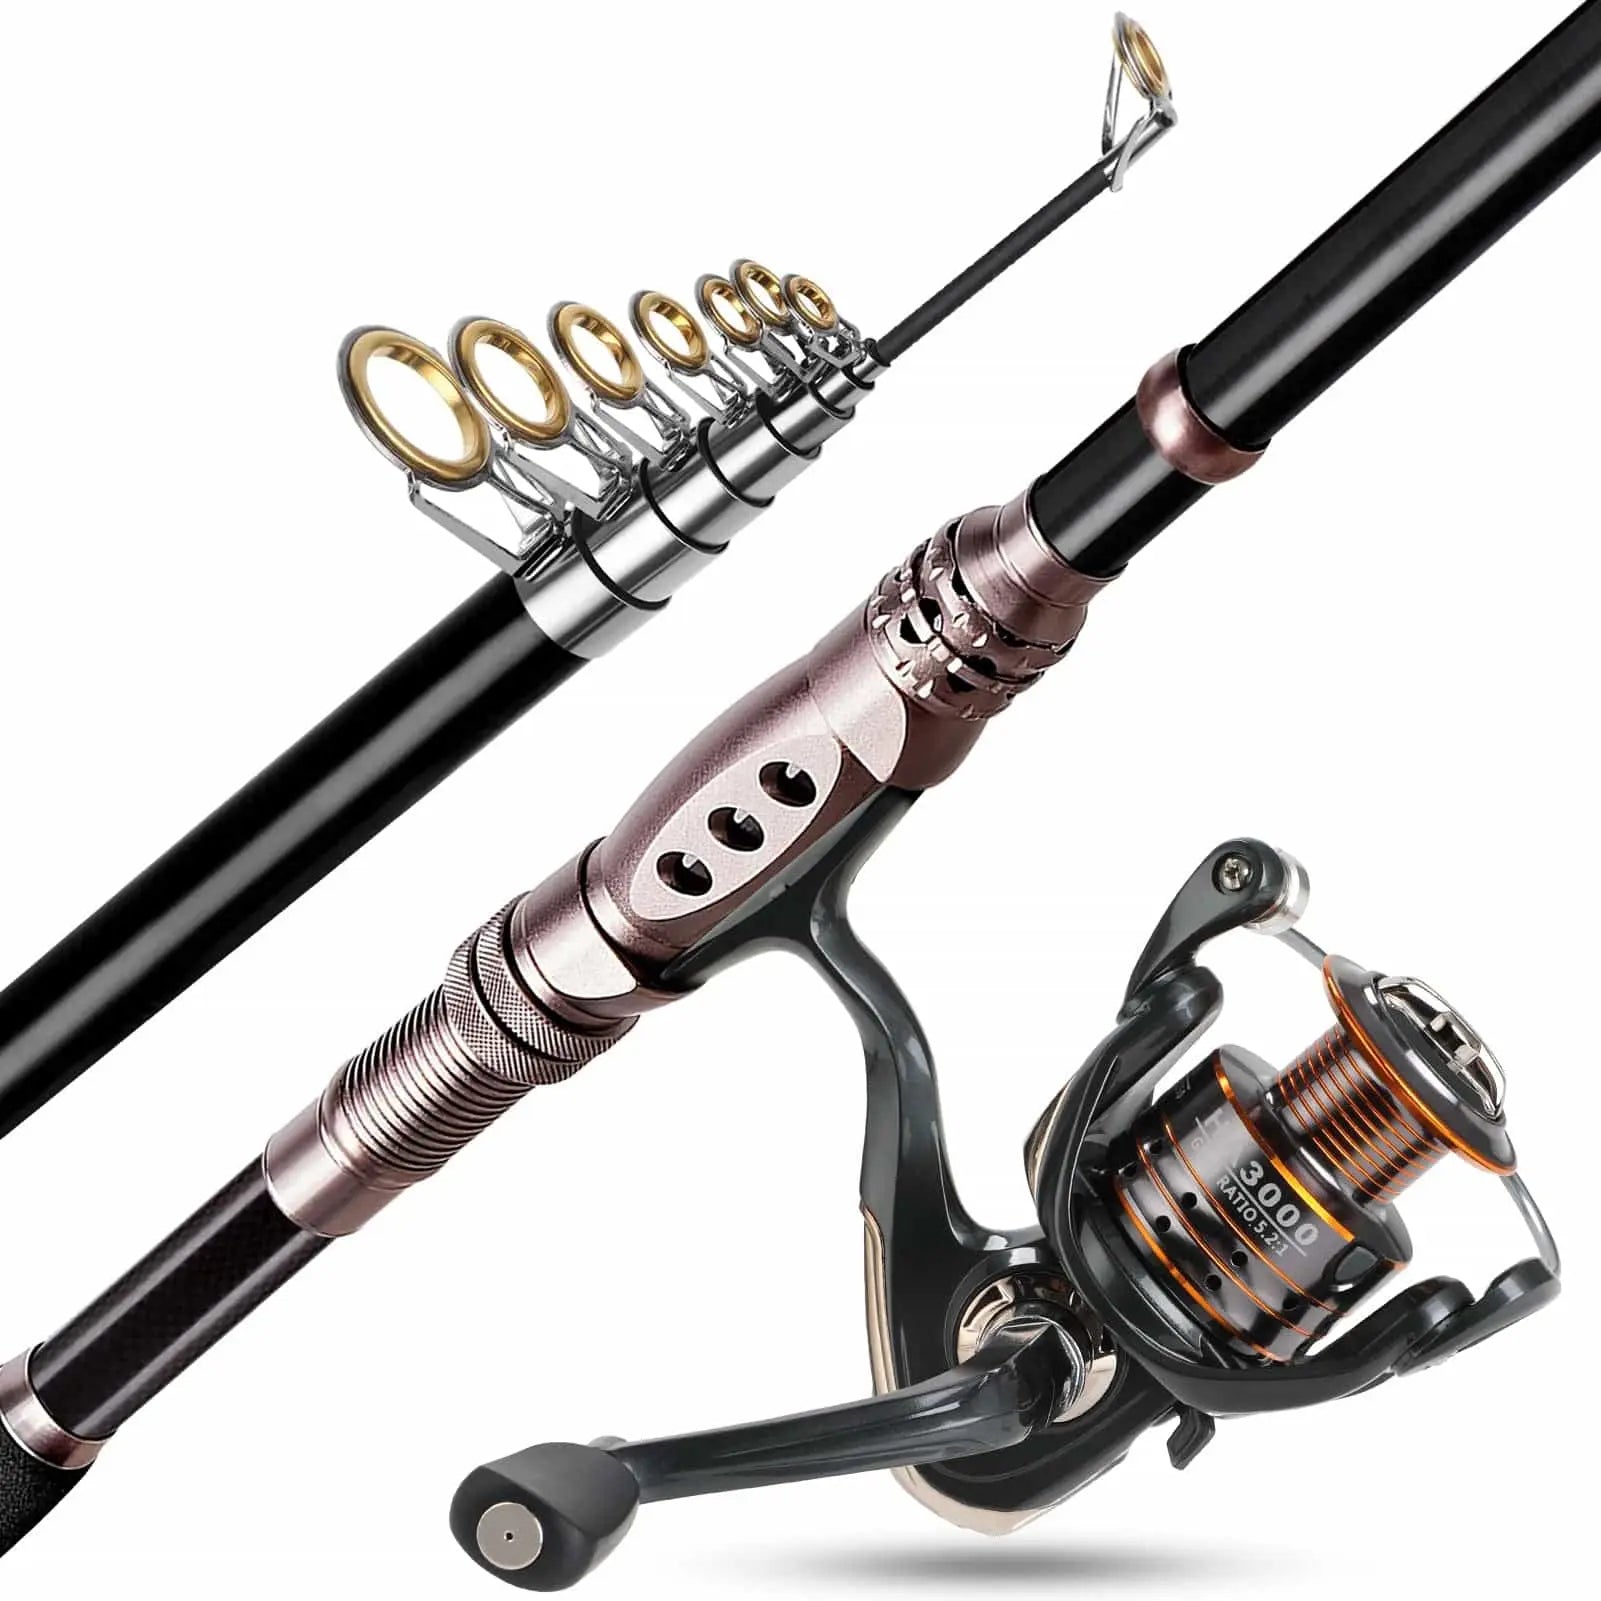 Retractable Fishing Pole,Telescope Fishing Poles and Reels Combo - Pole Reel  Starter Combo, Lightweight Portable Fishing Tackle Rod Fishing Accessories  for Bass, Trout, Saltwater, Rod & Reel Combos -  Canada